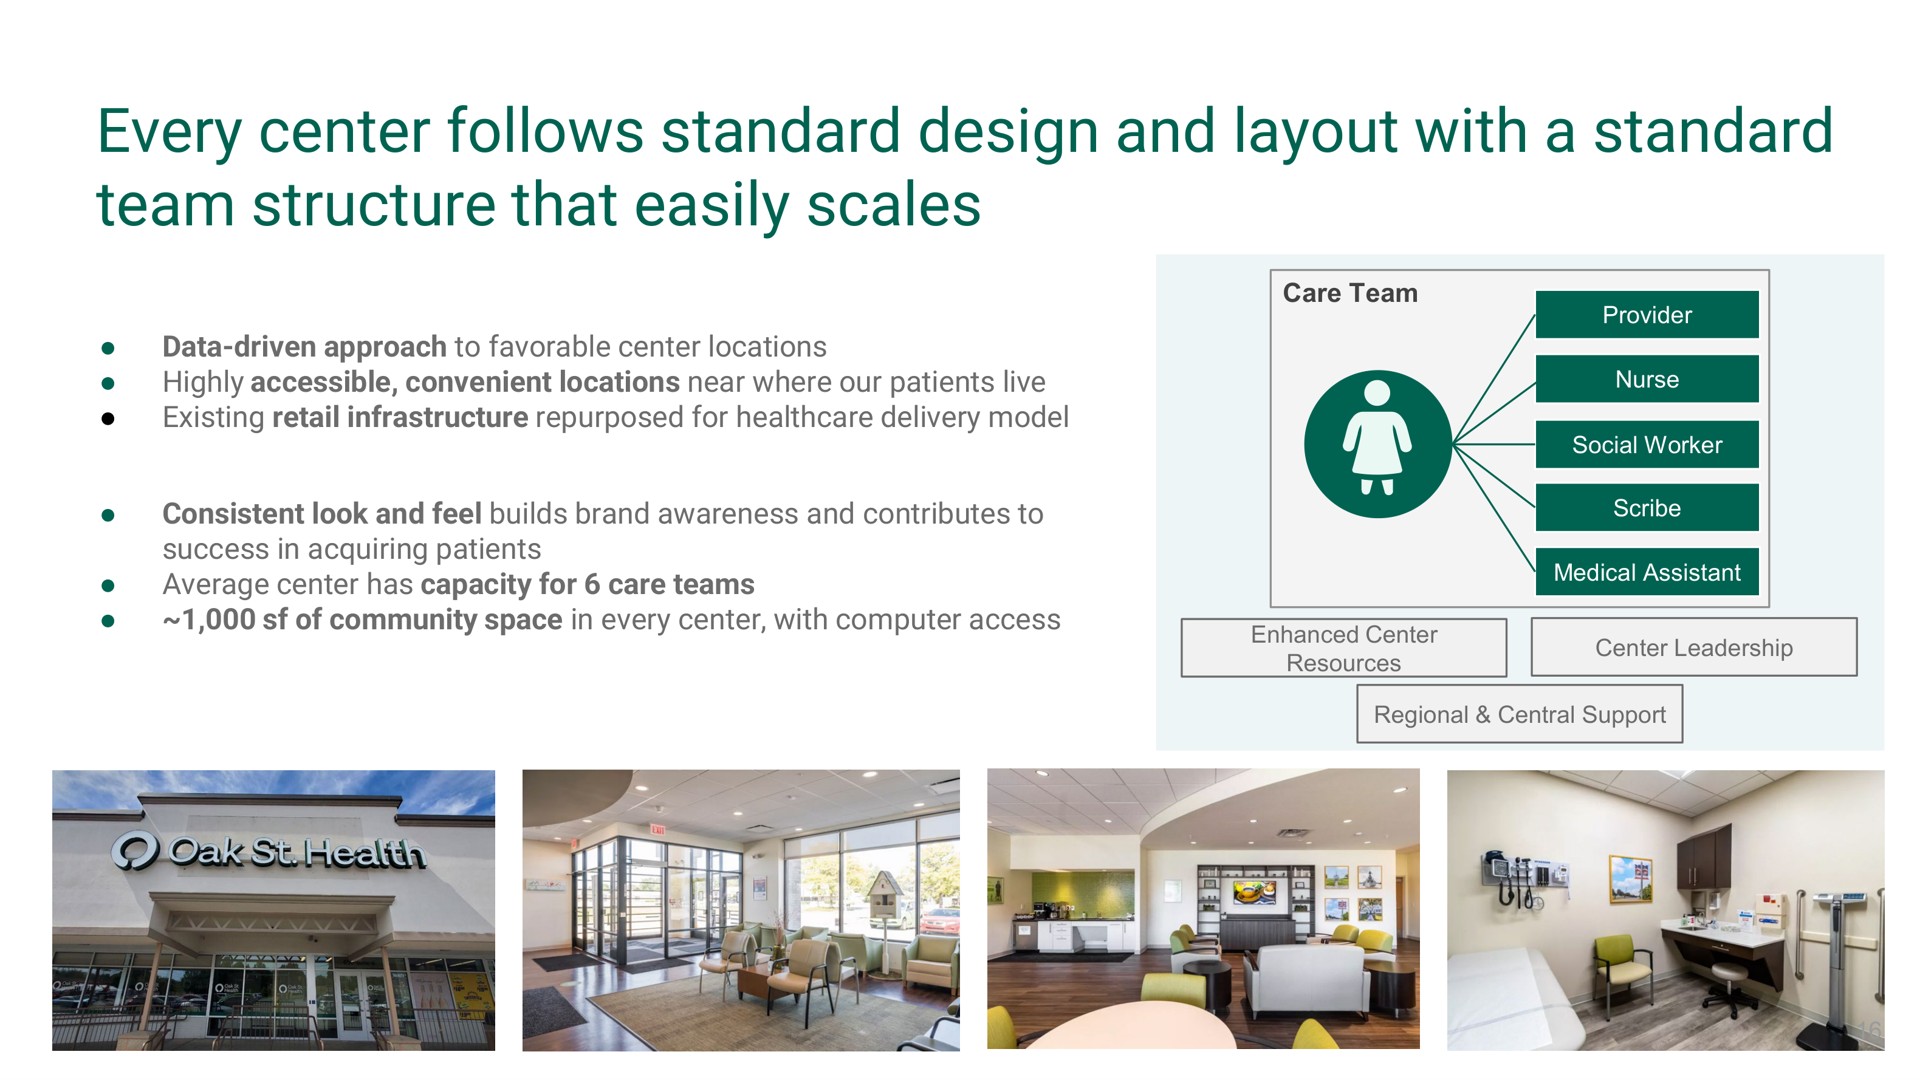 every center follows standard design and layout with a standard team structure that easily scales | Oak Street Health